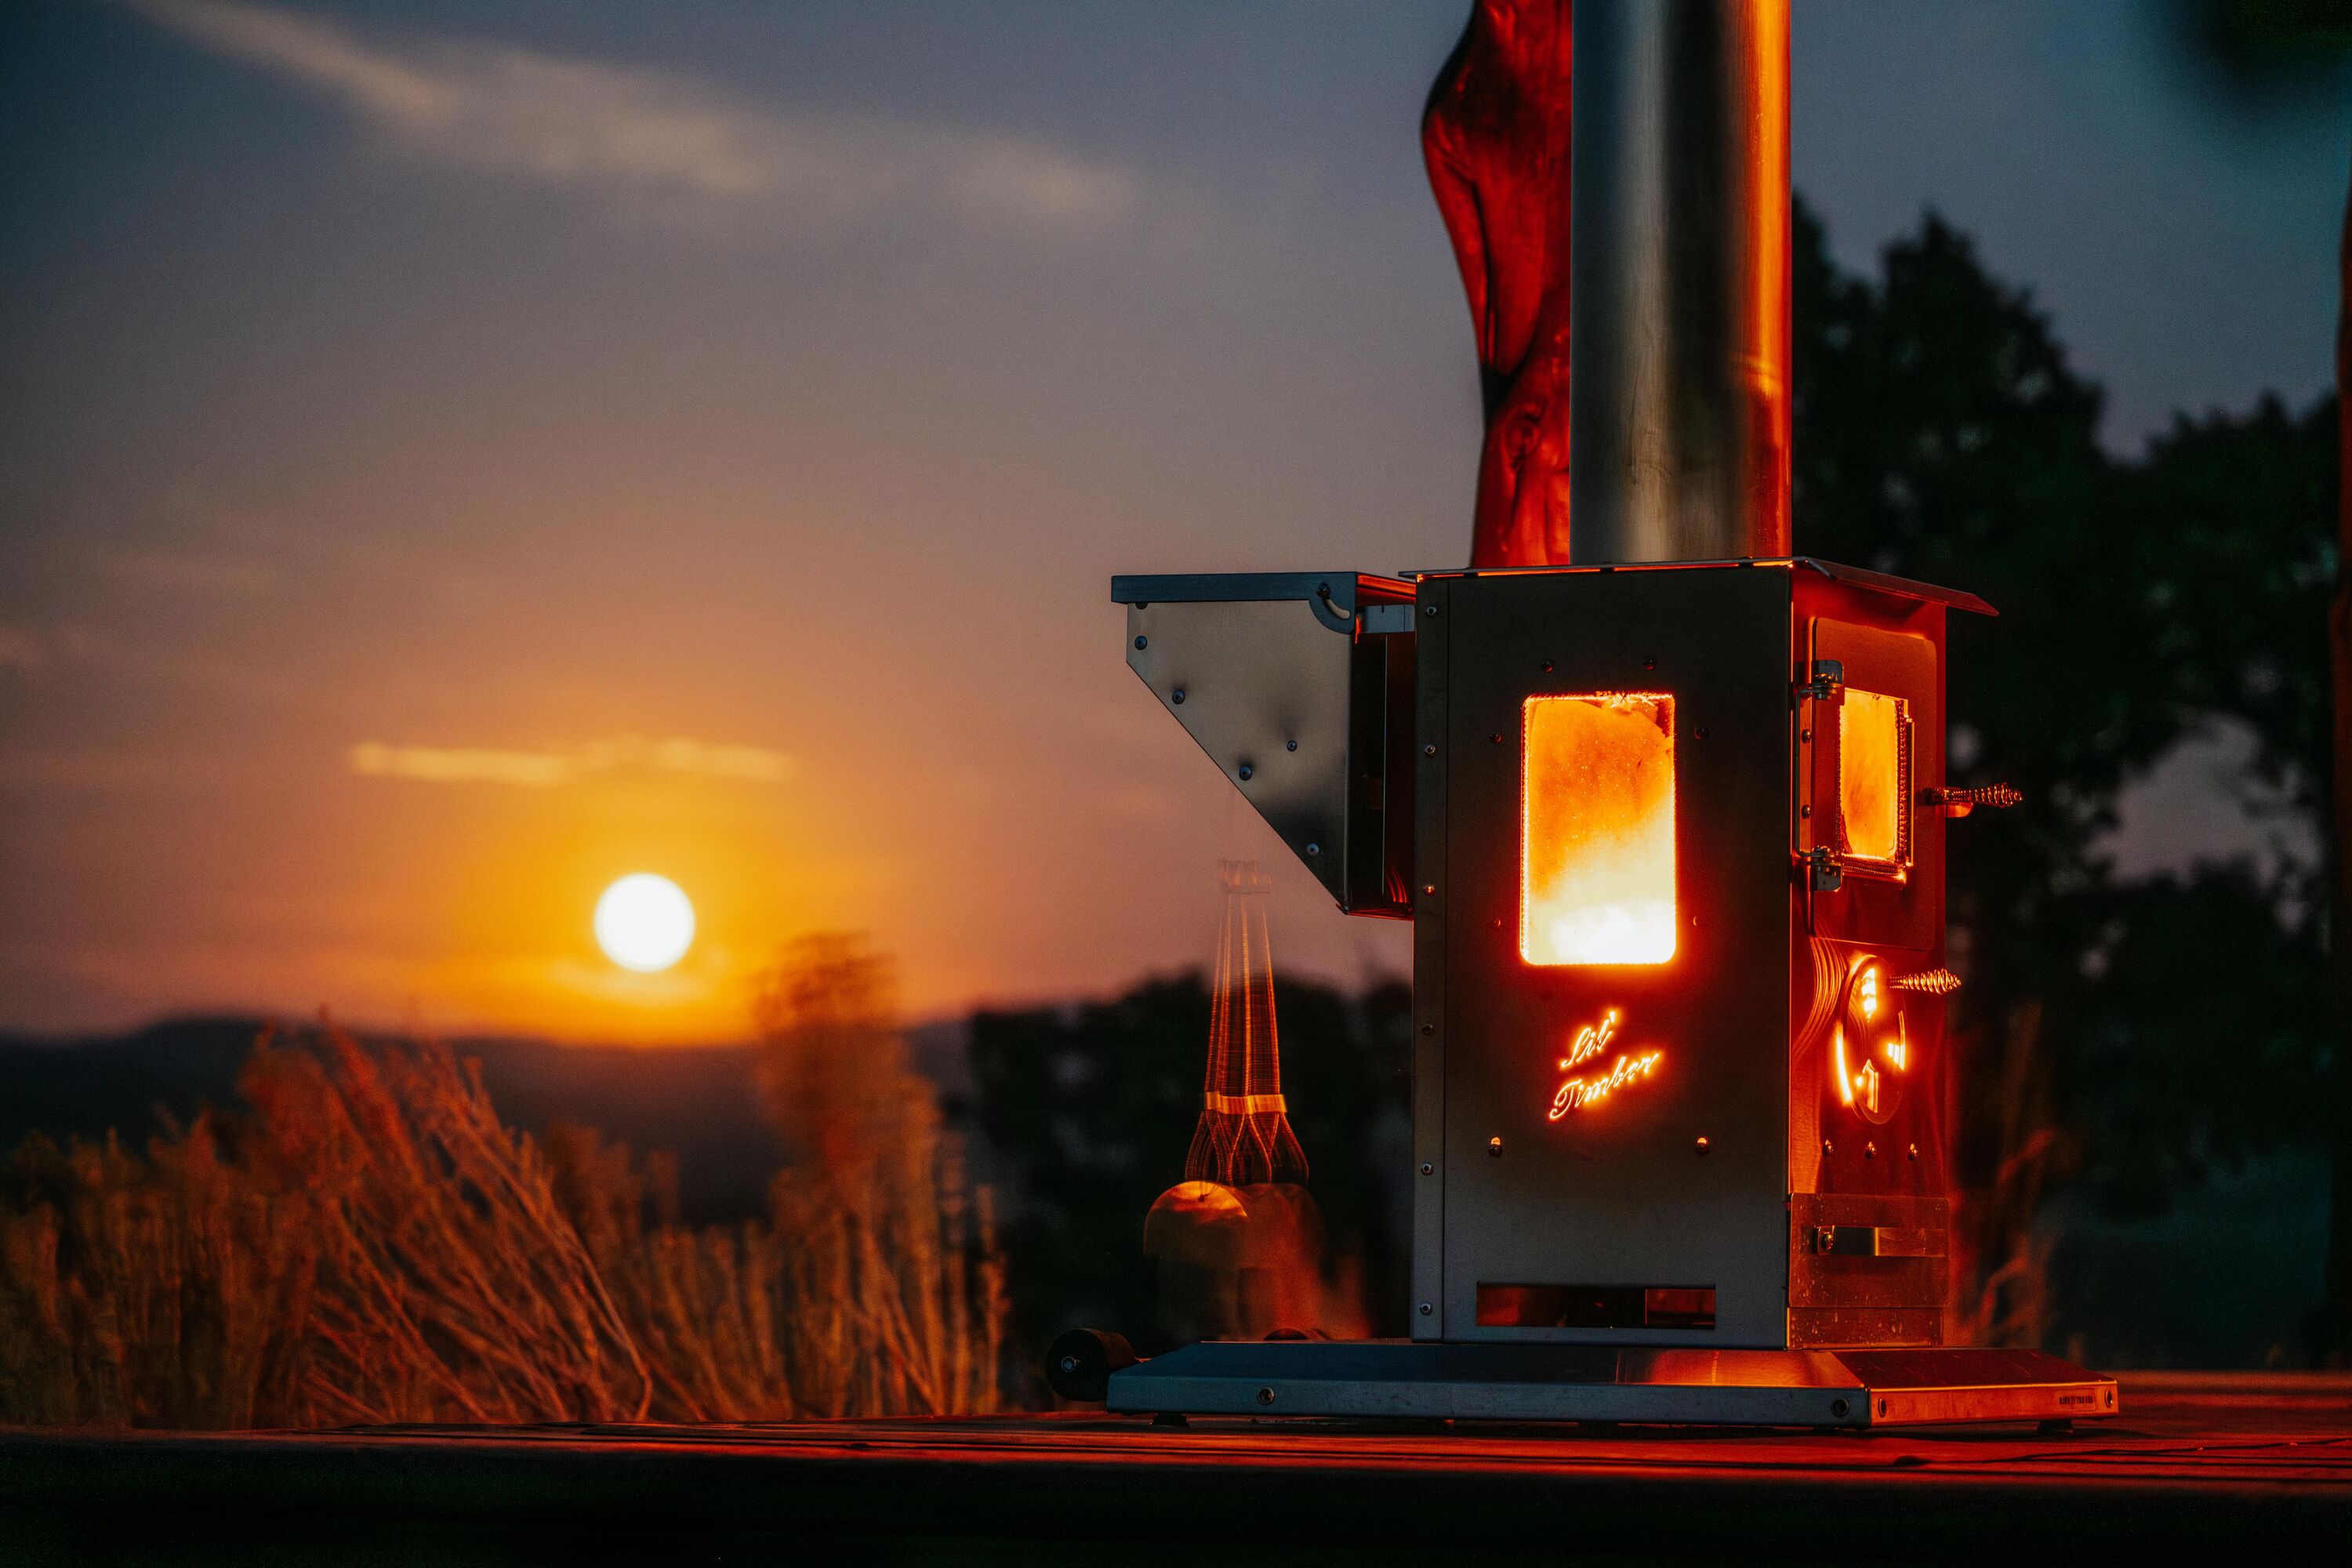 Timber Stoves Big Timber Stainless Steel Pellet Patio Heater